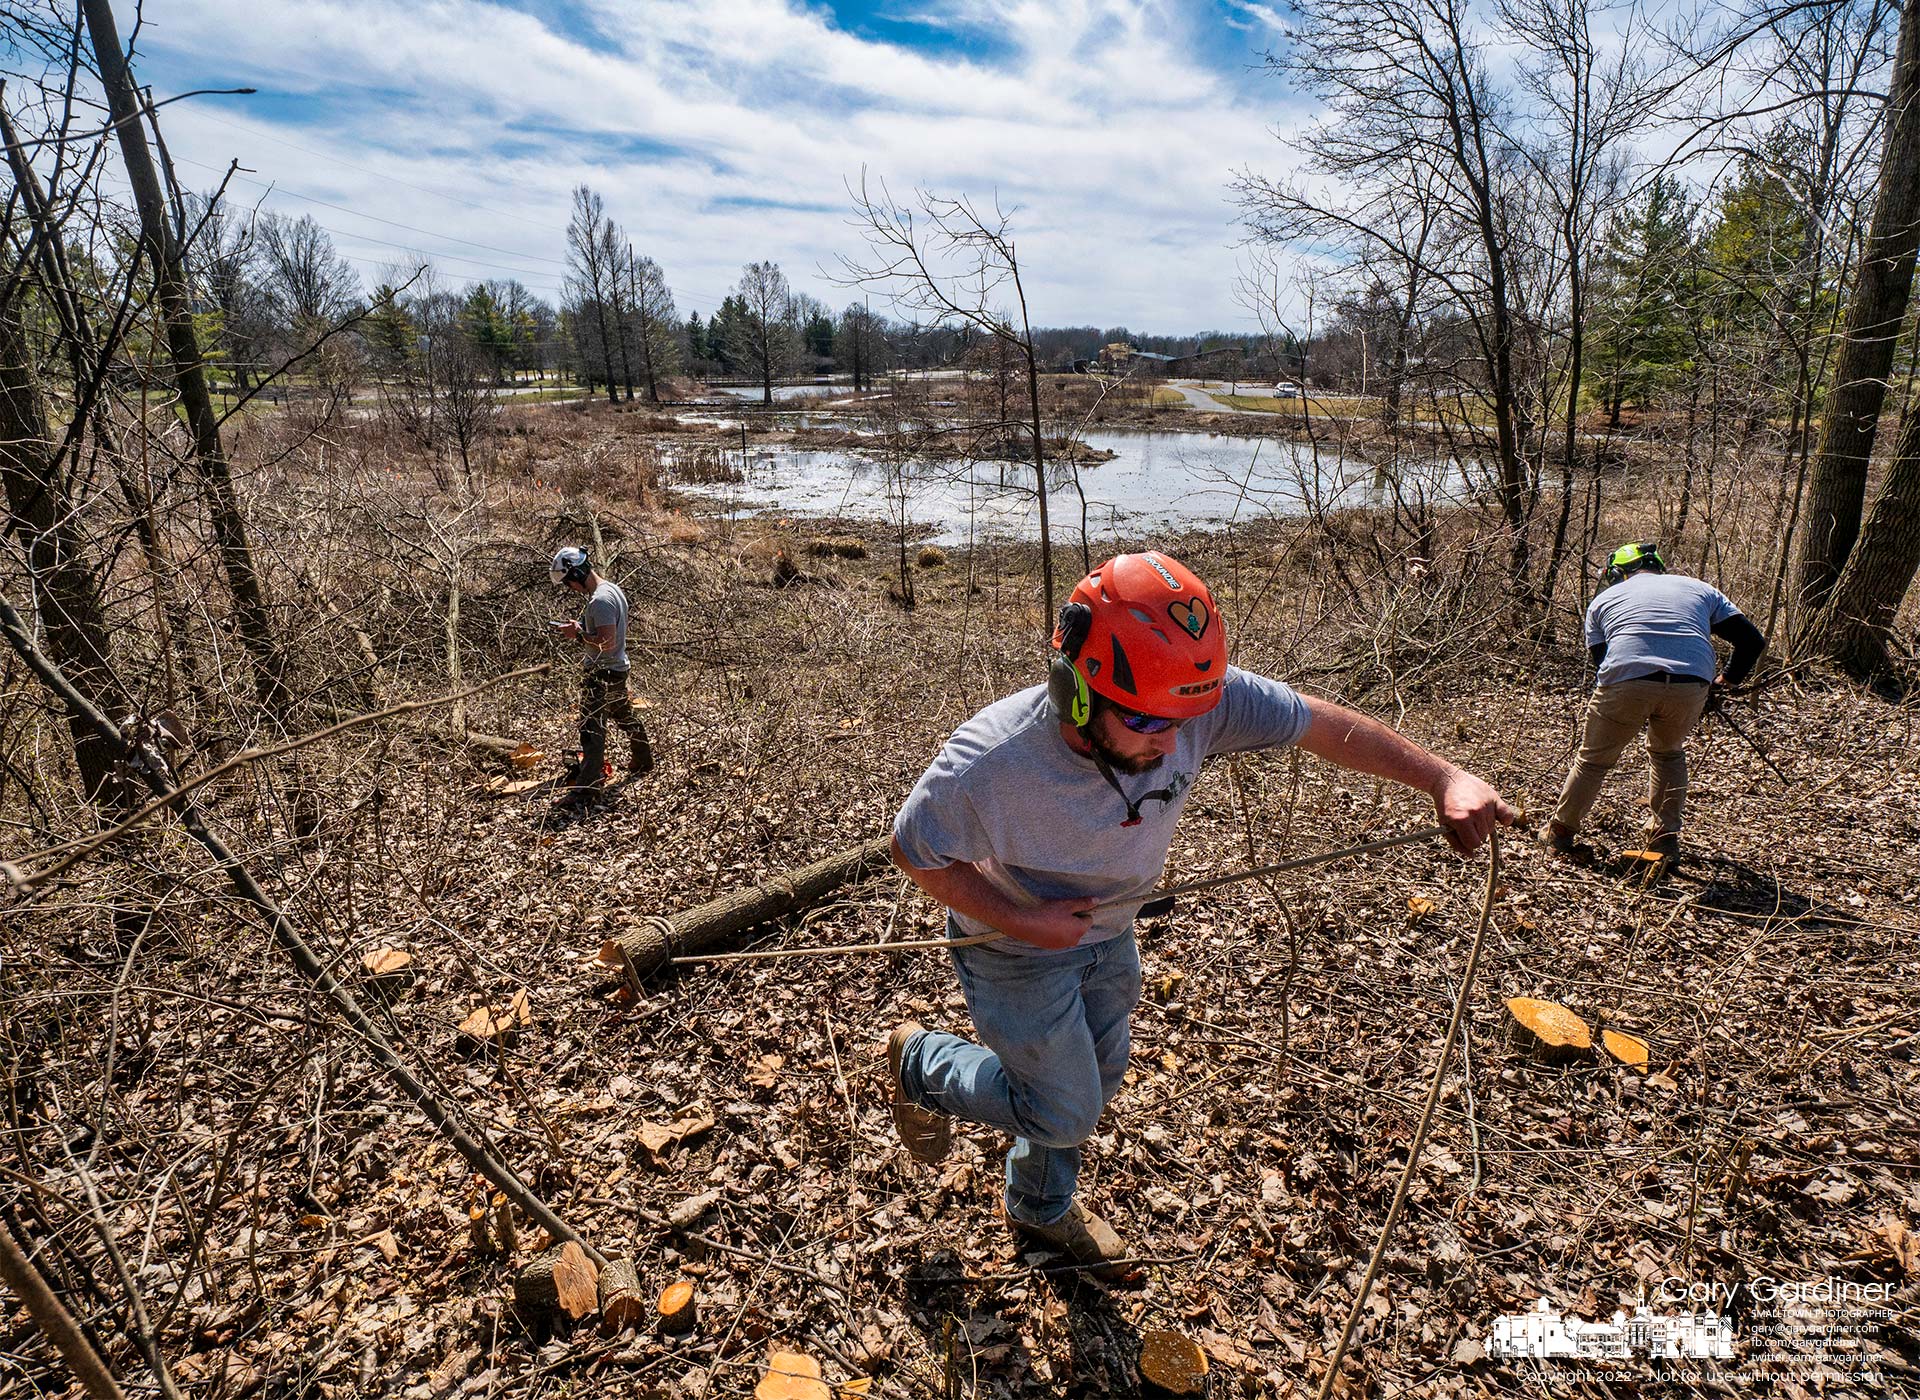 A city parks and recreation crew clears Bradford pears and honeysuckle from the northern slope of the wetlands at Highlands Aquatic Park. My Final Photo for March 16, 2022.